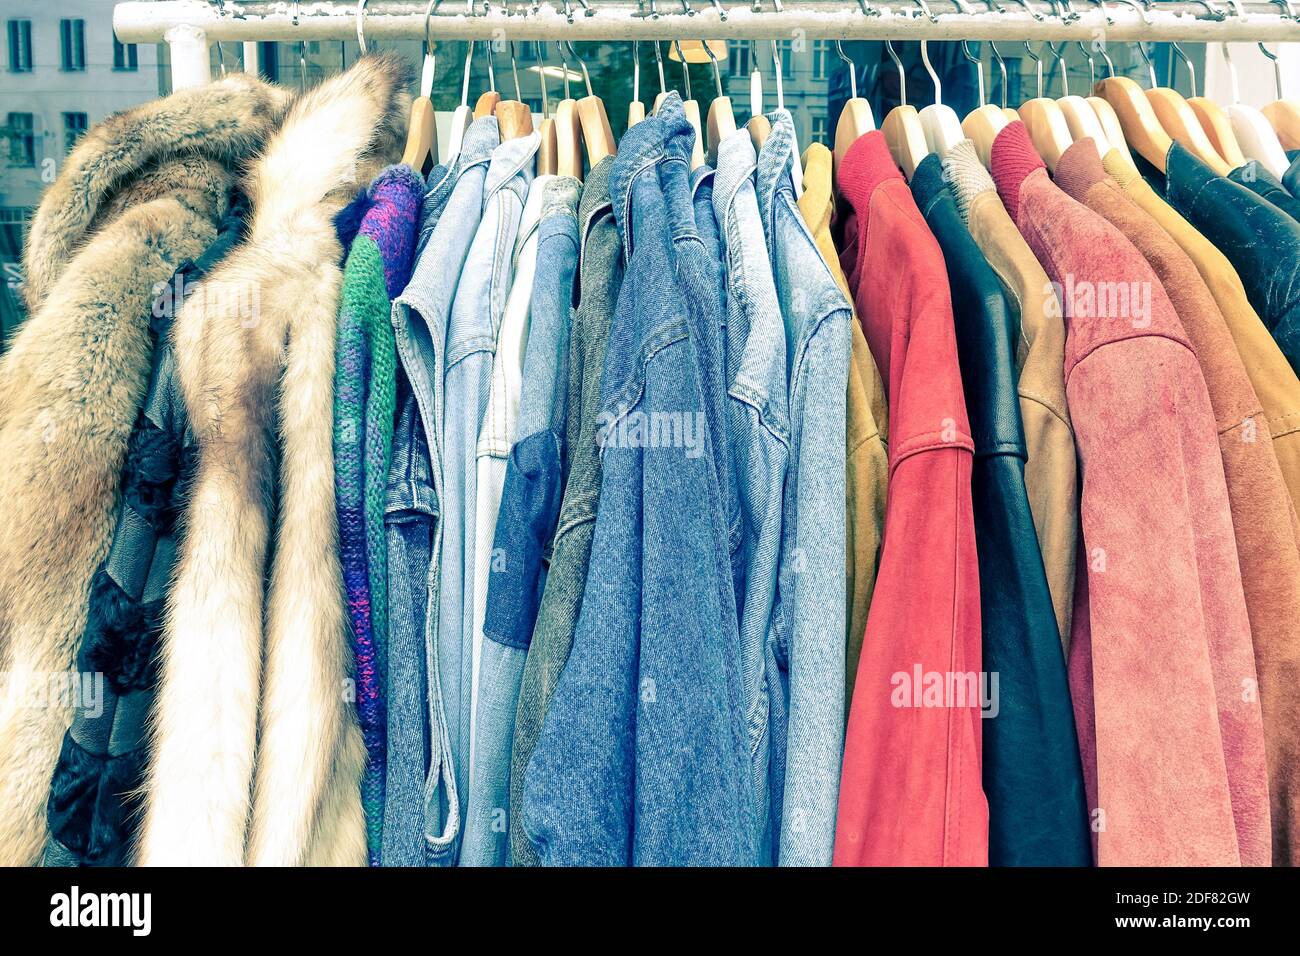 Vintage second hand clothes hanging on shop rack at weekly flea market - Hipster wardrobe sale concept and alternative retro moda fashion styling Stock Photo